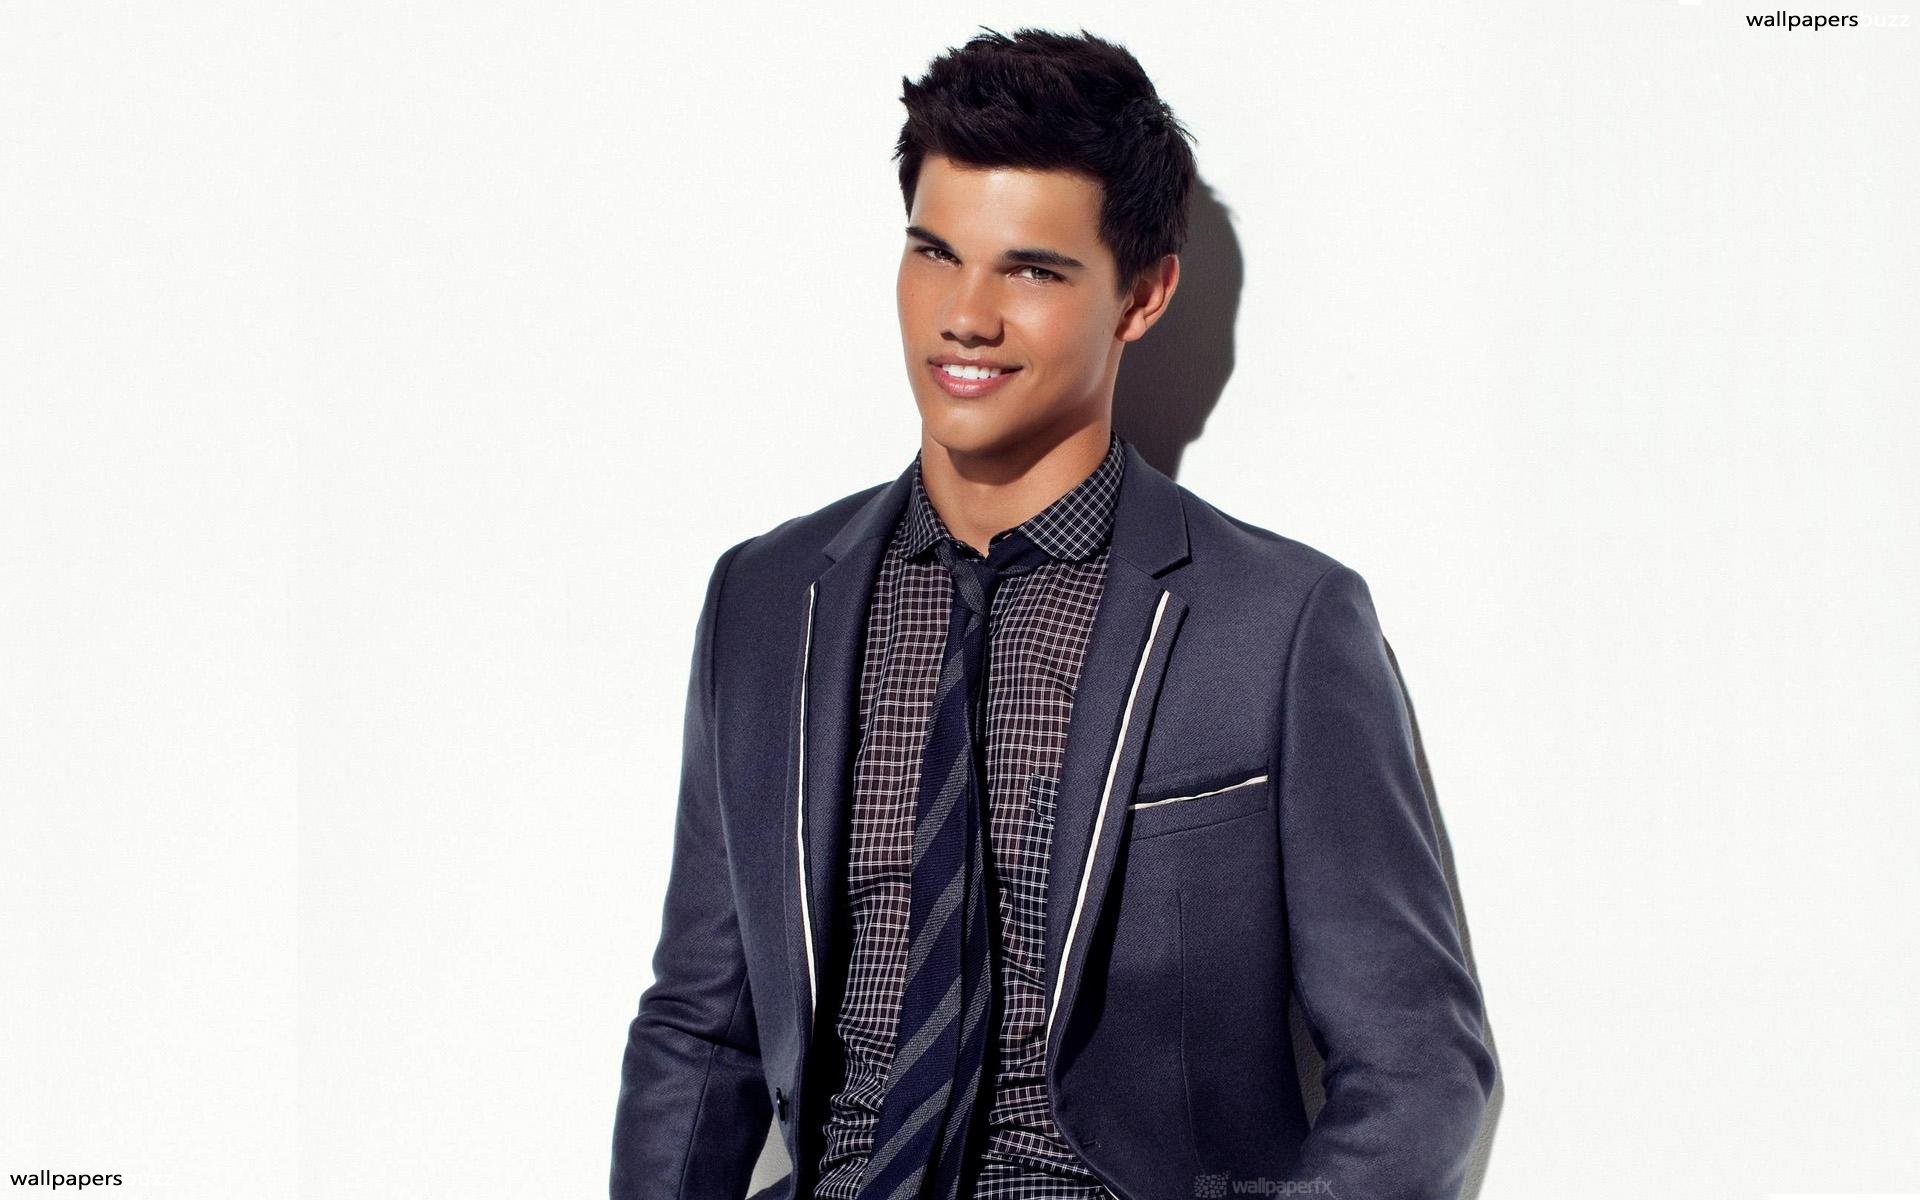 Stylish Taylor Lautner - Taylor Lautner In The Suit , HD Wallpaper & Backgrounds